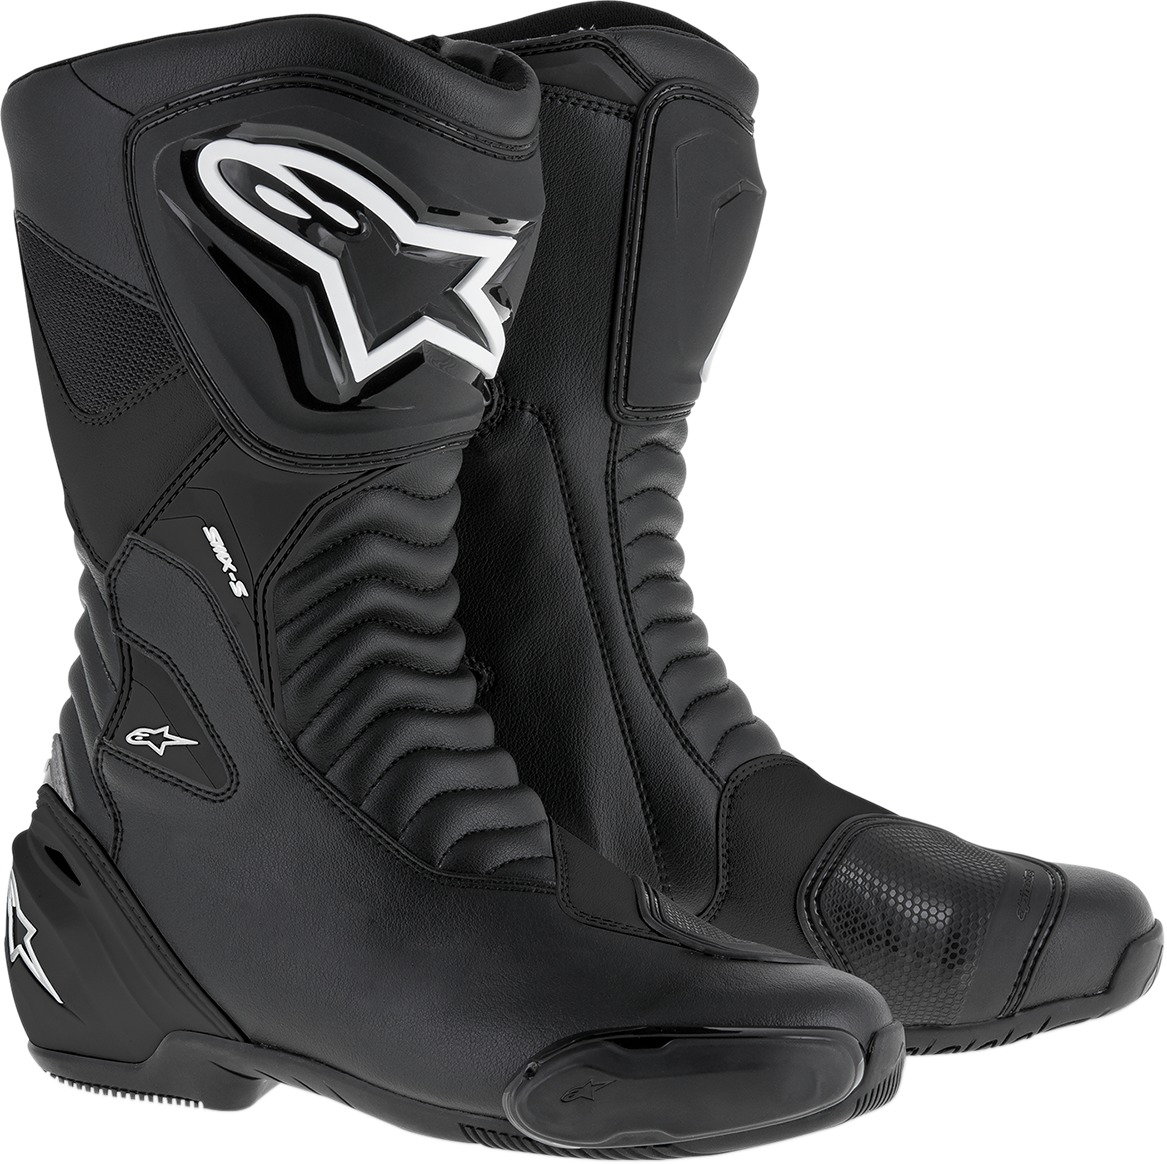 SMX-S Street Riding Boots Black US 13.5 - Click Image to Close